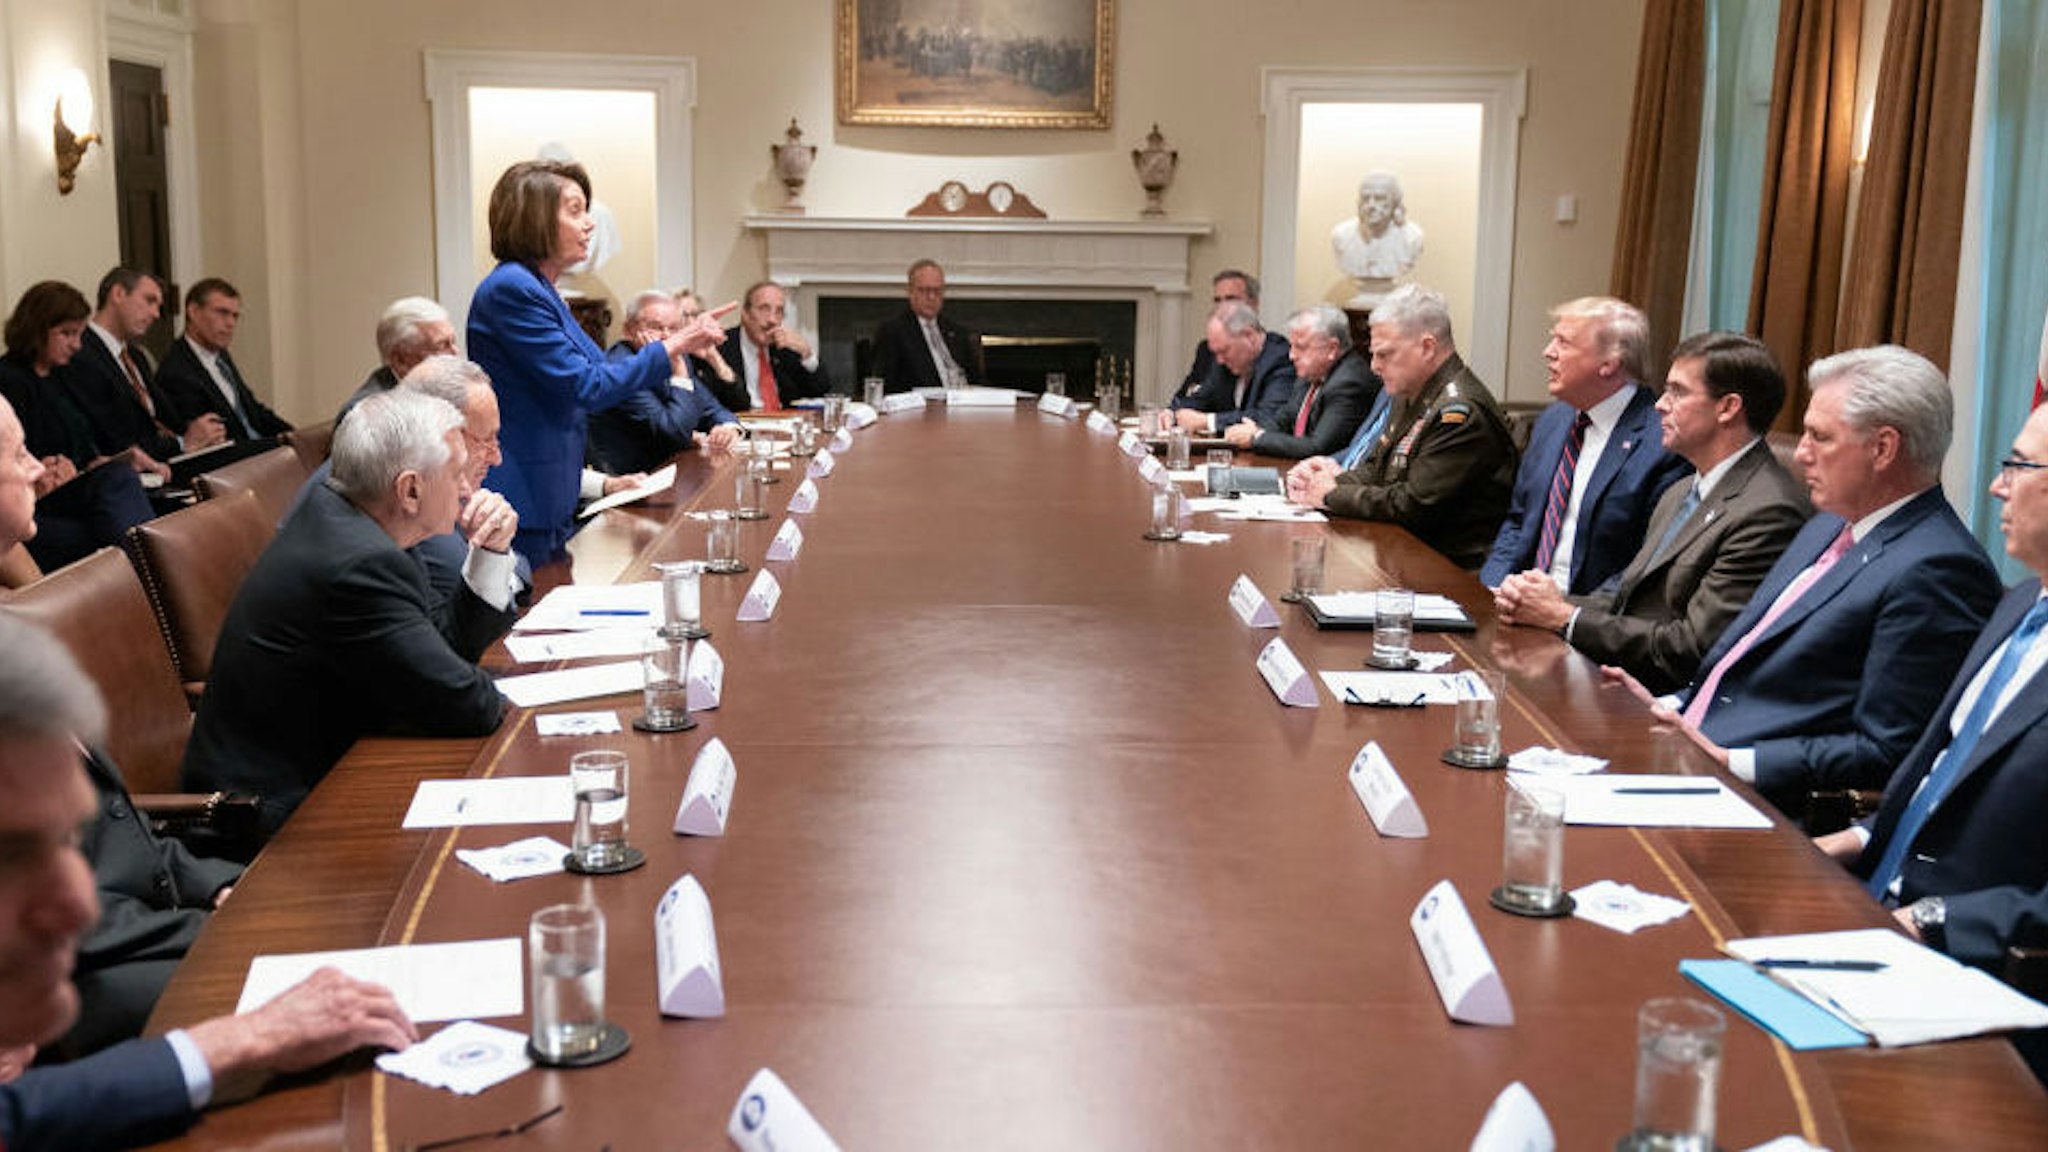 WASHINGTON, DC - OCTOBER 16: In this handout provided by the White House, U.S. President Donald Trump meets with House Speaker Nancy Pelosi and Congressional leadership in the Cabinet Room of the White House October 16, 2019 in Washington, DC. Pelosi later said Trump referred to her as a "third-grade politician.